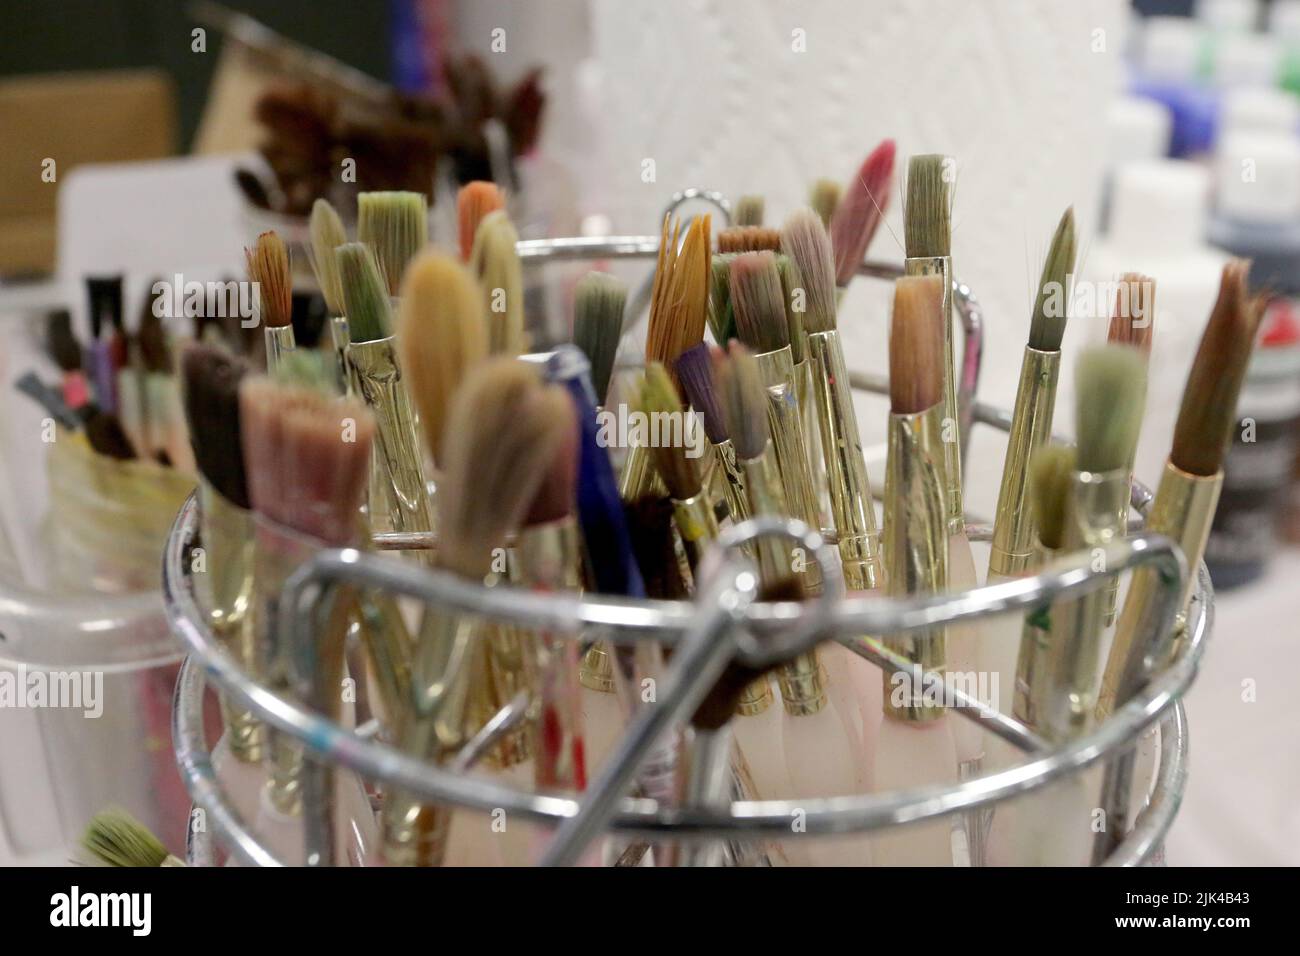 Artist paintbrushes stand ready for use with other art supplies in a still life. Stock Photo